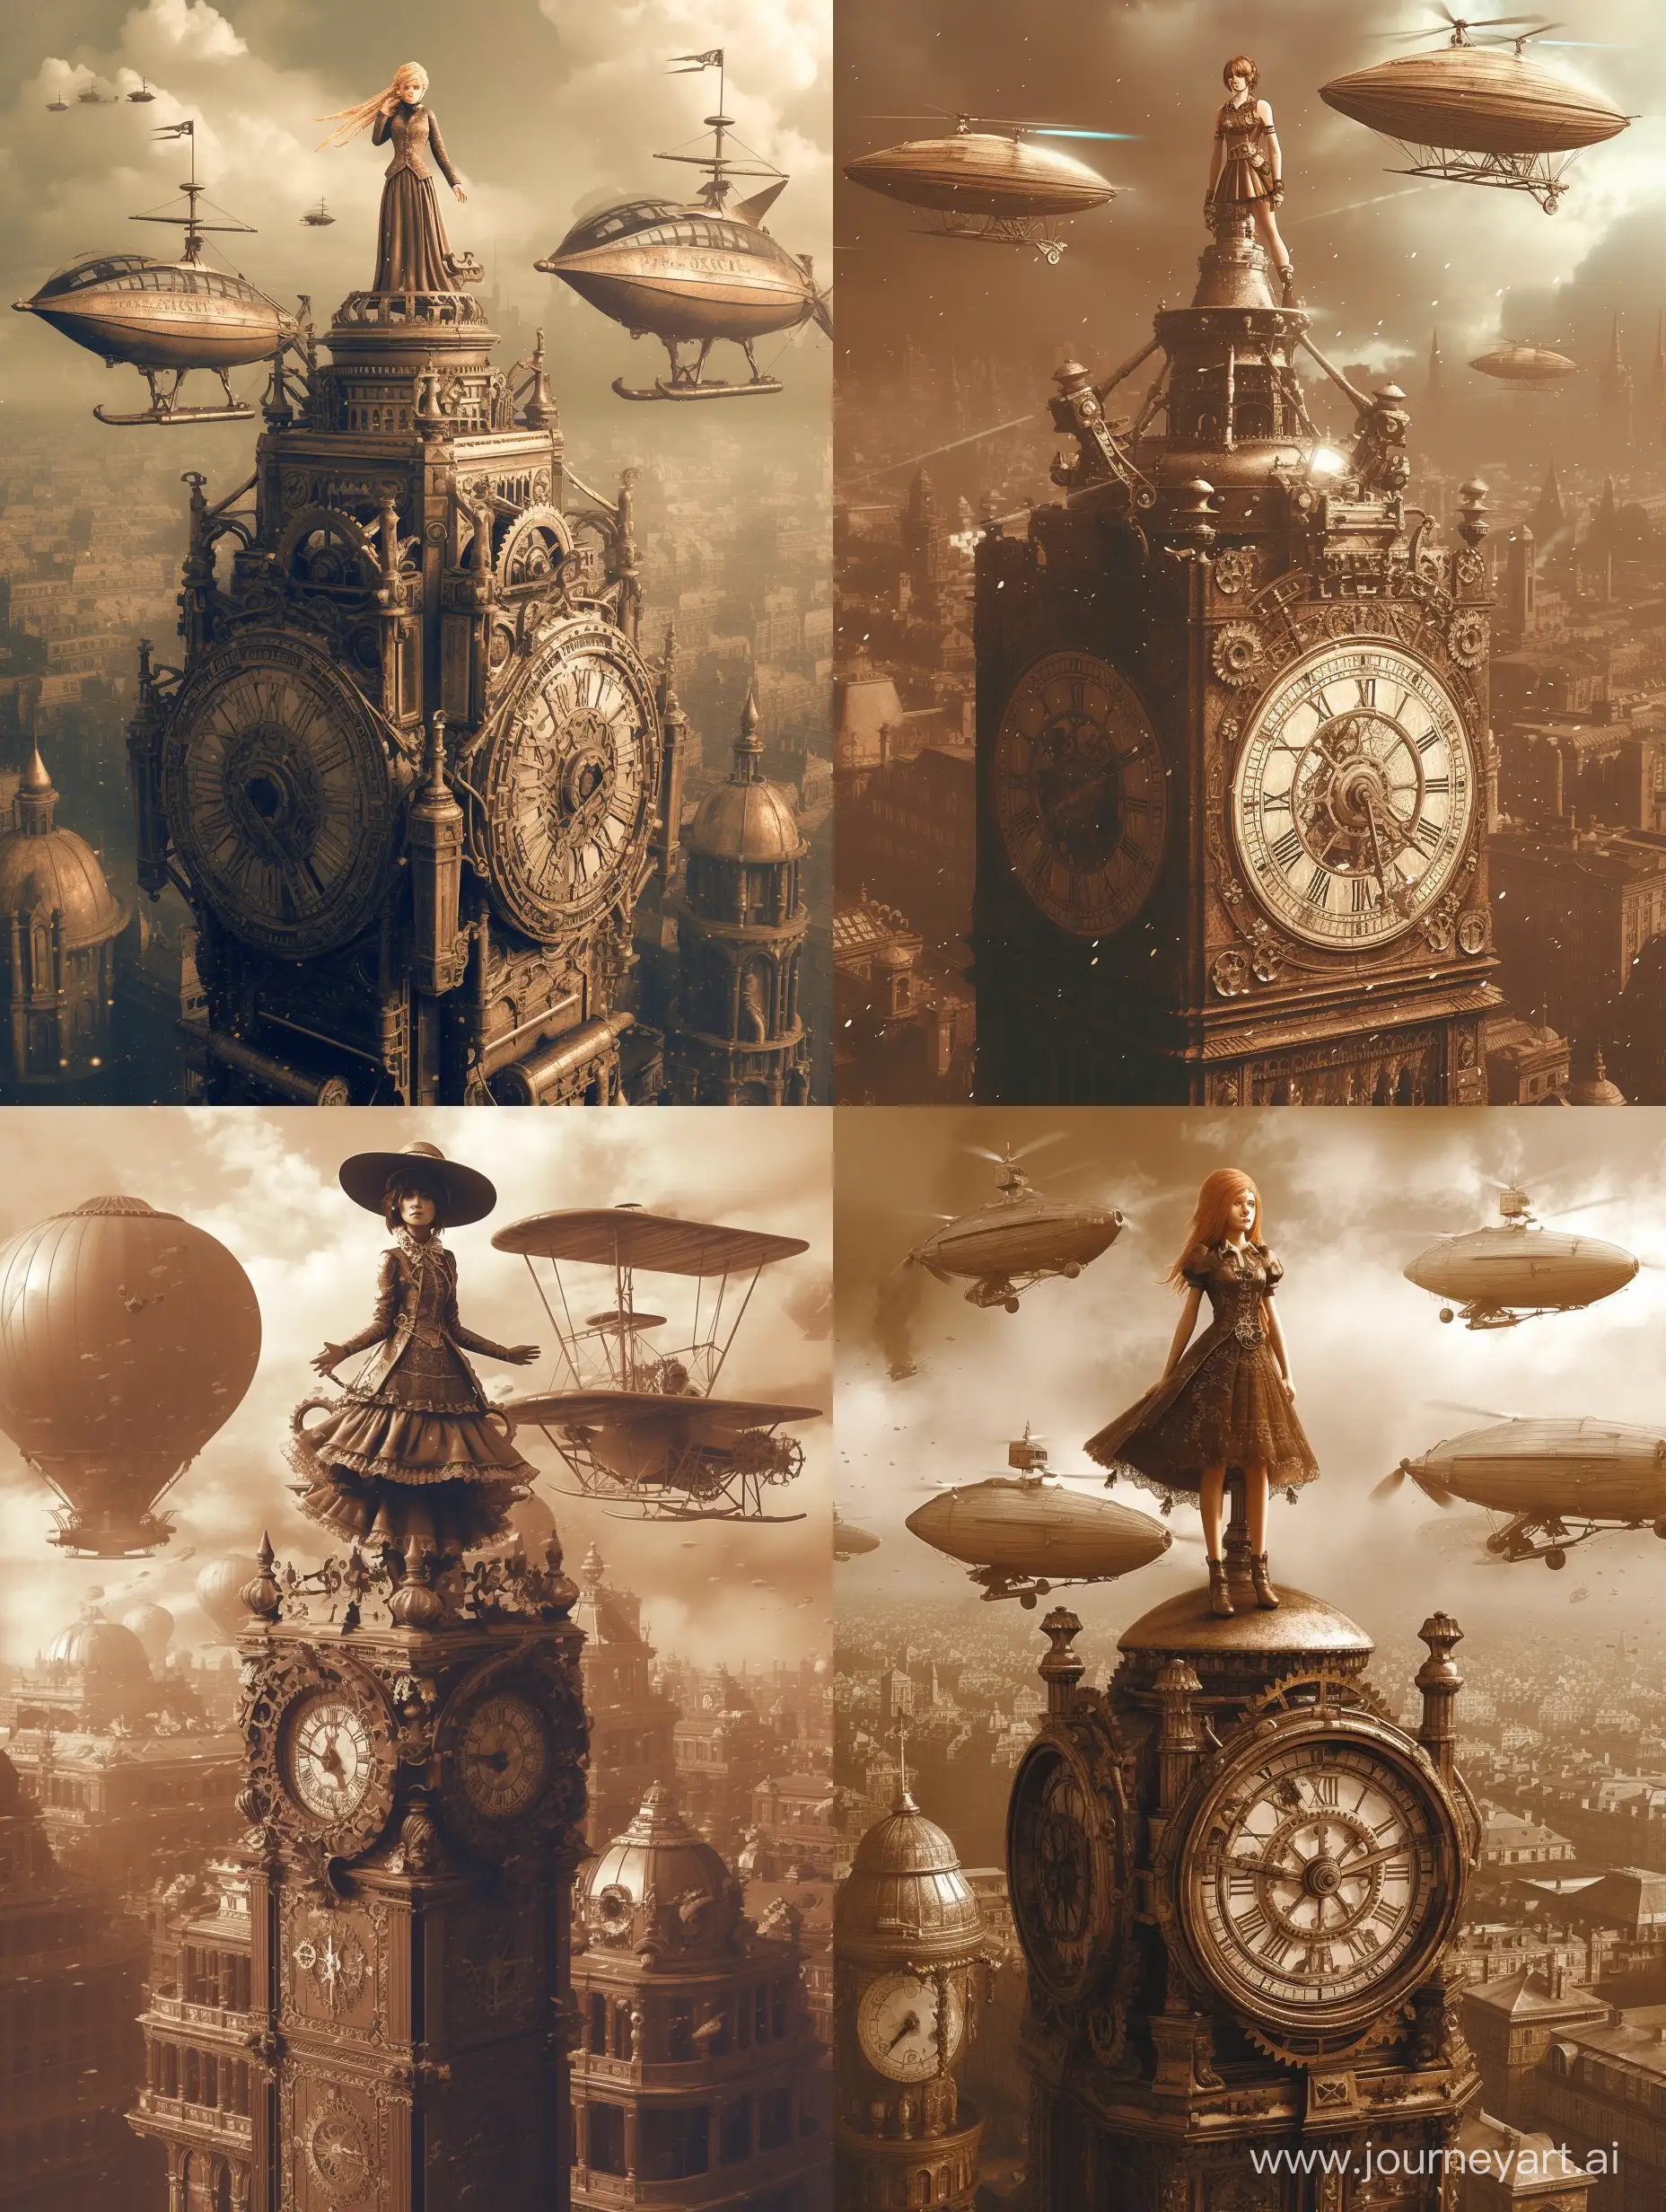 high quality, 8K Ultra HD, Steampunk Time Voyager, Embark on a thrilling journey through time in a steampunk-infused world, where past and future intertwine in perfect unison. This intricate digital art piece captures the essence of a daring time voyager exploring a Victorian-era metropolis with a steampunk twist, The protagonist, a courageous young woman adorned in a blend of vintage and futuristic attire, stands atop a colossal clock tower adorned with ornate cogs and gears, Airships gracefully traverse the skies, propelled by precise mechanical propellers, The city's architecture harmoniously blends classic Victorian elegance with intricate steampunk machinery, resulting in a visually captivating juxtaposition, Rich sepia tones and metallic hues evoke a sense of depth and nostalgic allure, by yukisakura, high detailed,